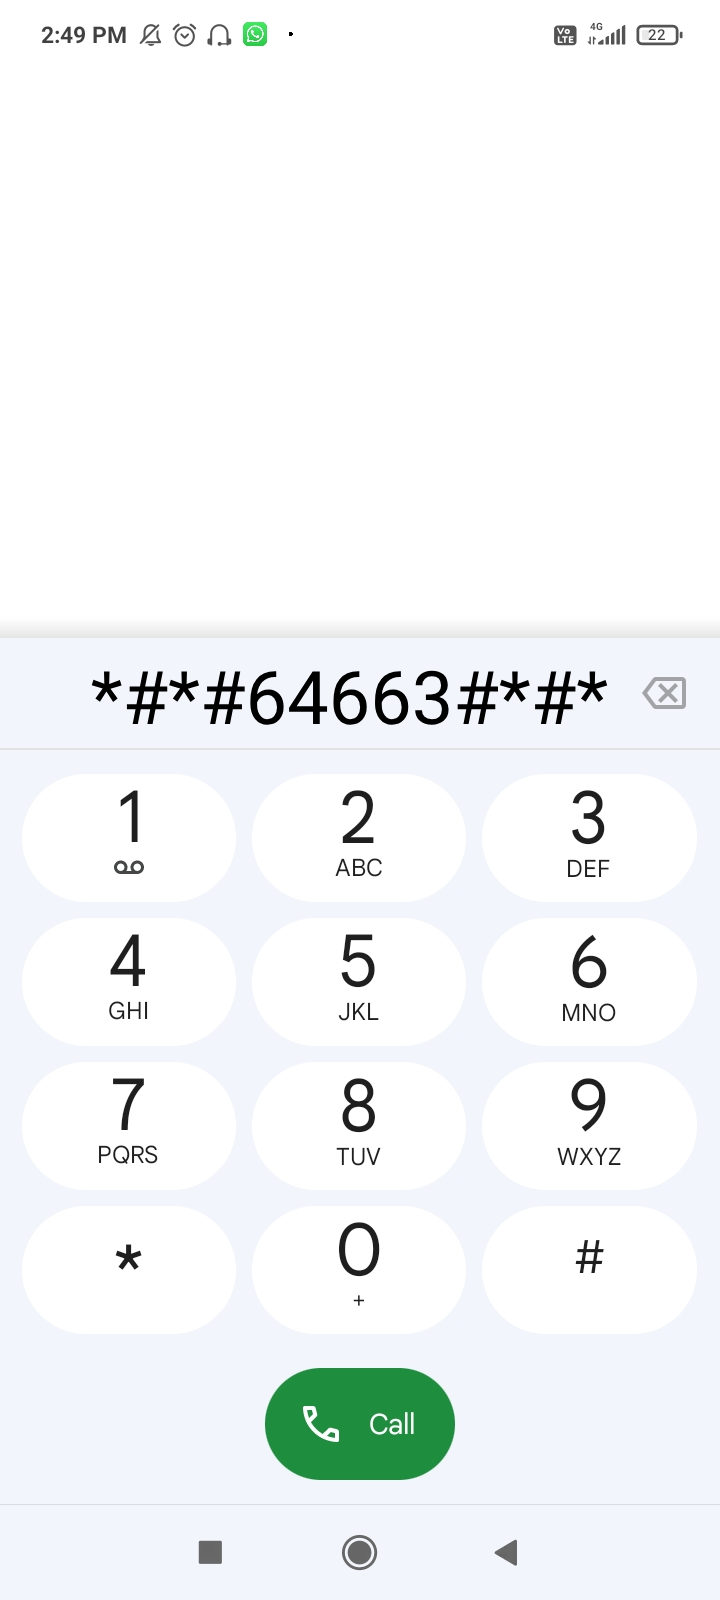 Secret Android code for diagnostics entered into the dialler.